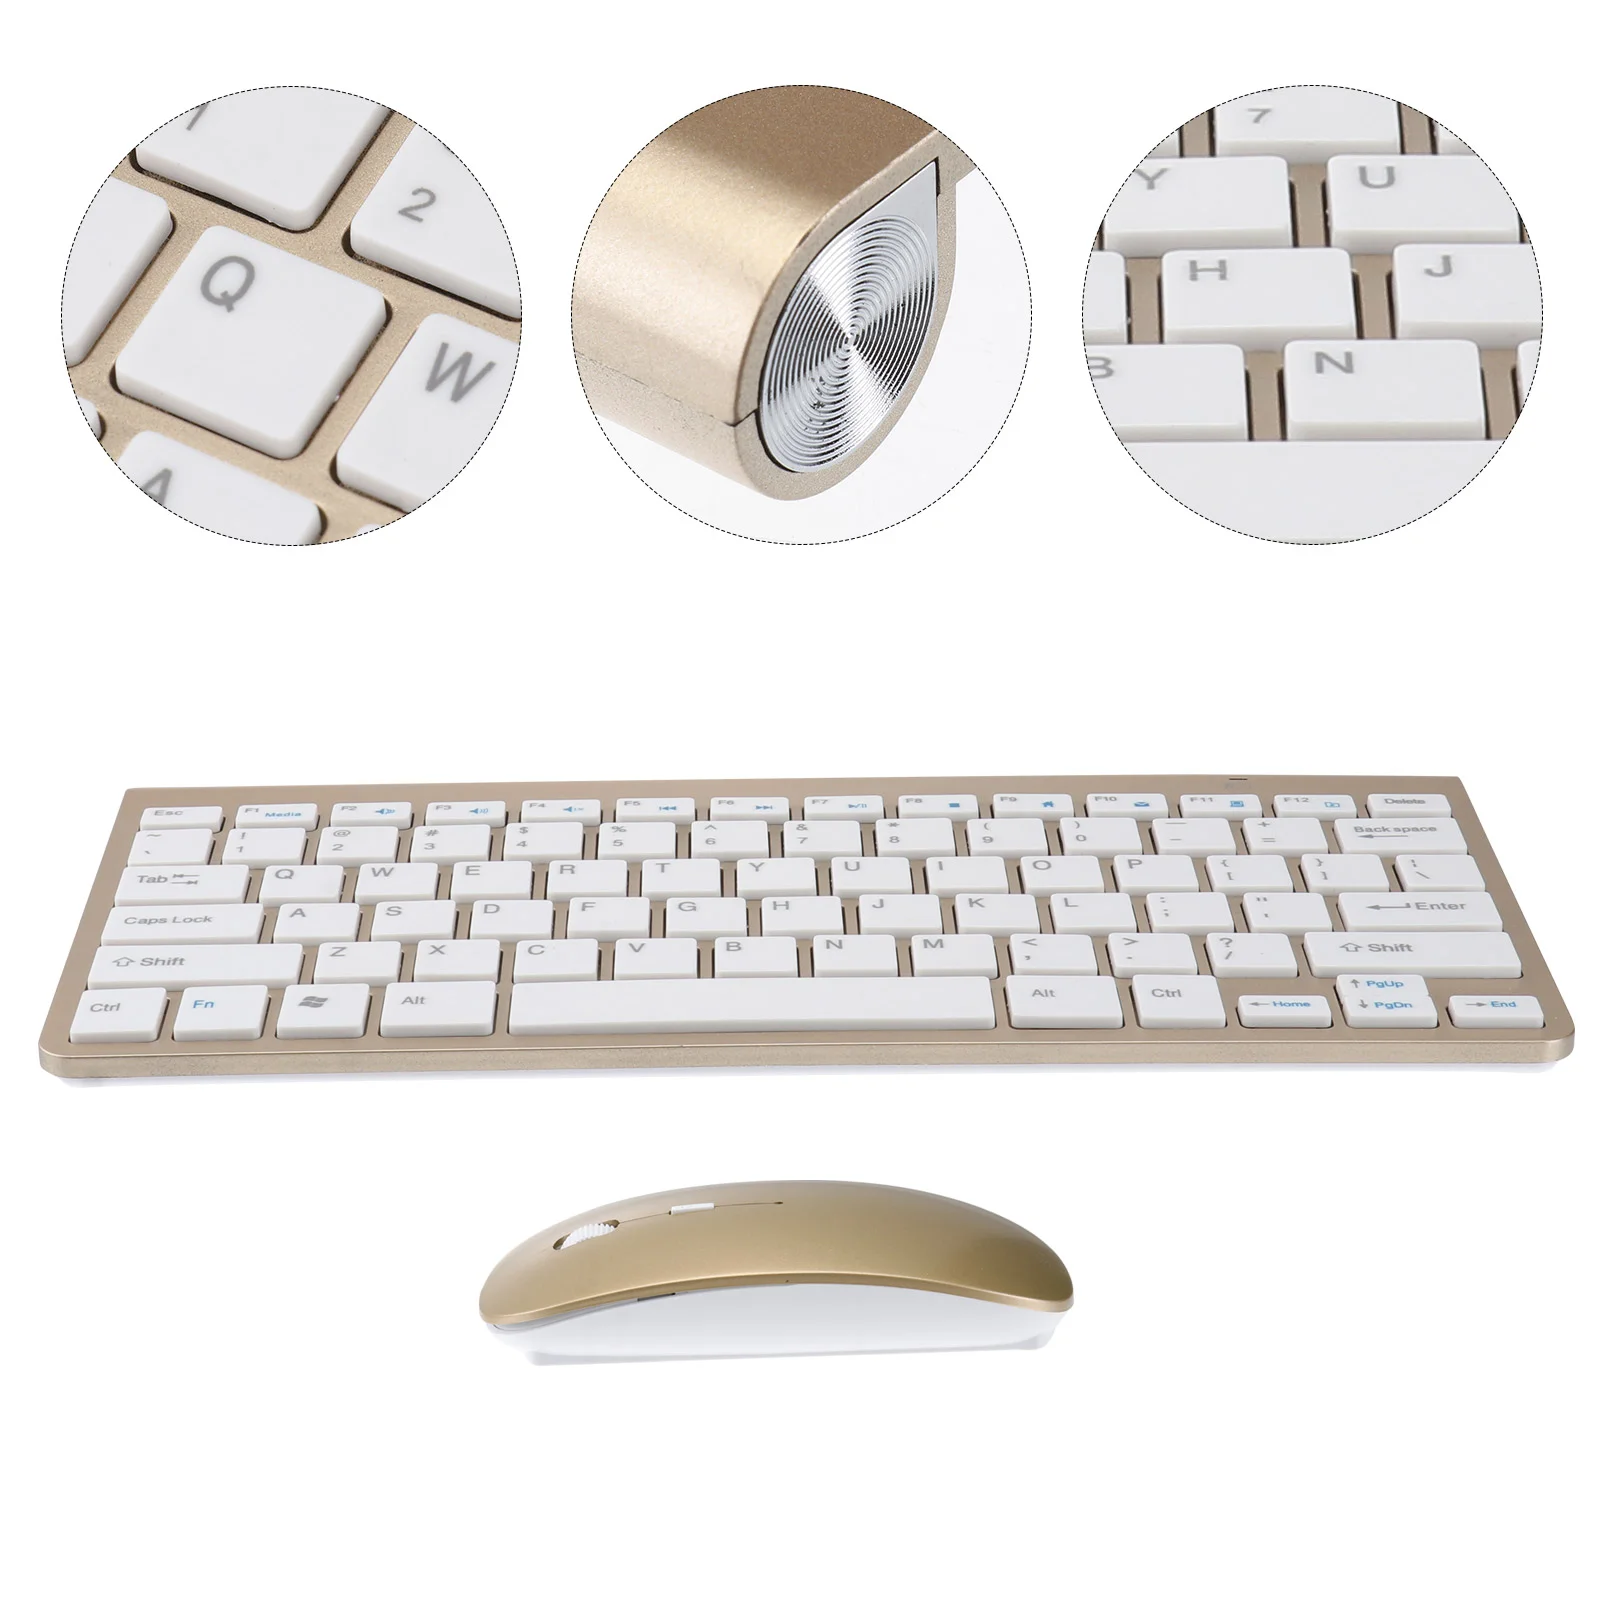 

24G Wireless Keyboard and Mouse Comb- thin Mute Keyboard and Mouse for Computer Desktop Home Dorm Office ( Golden )